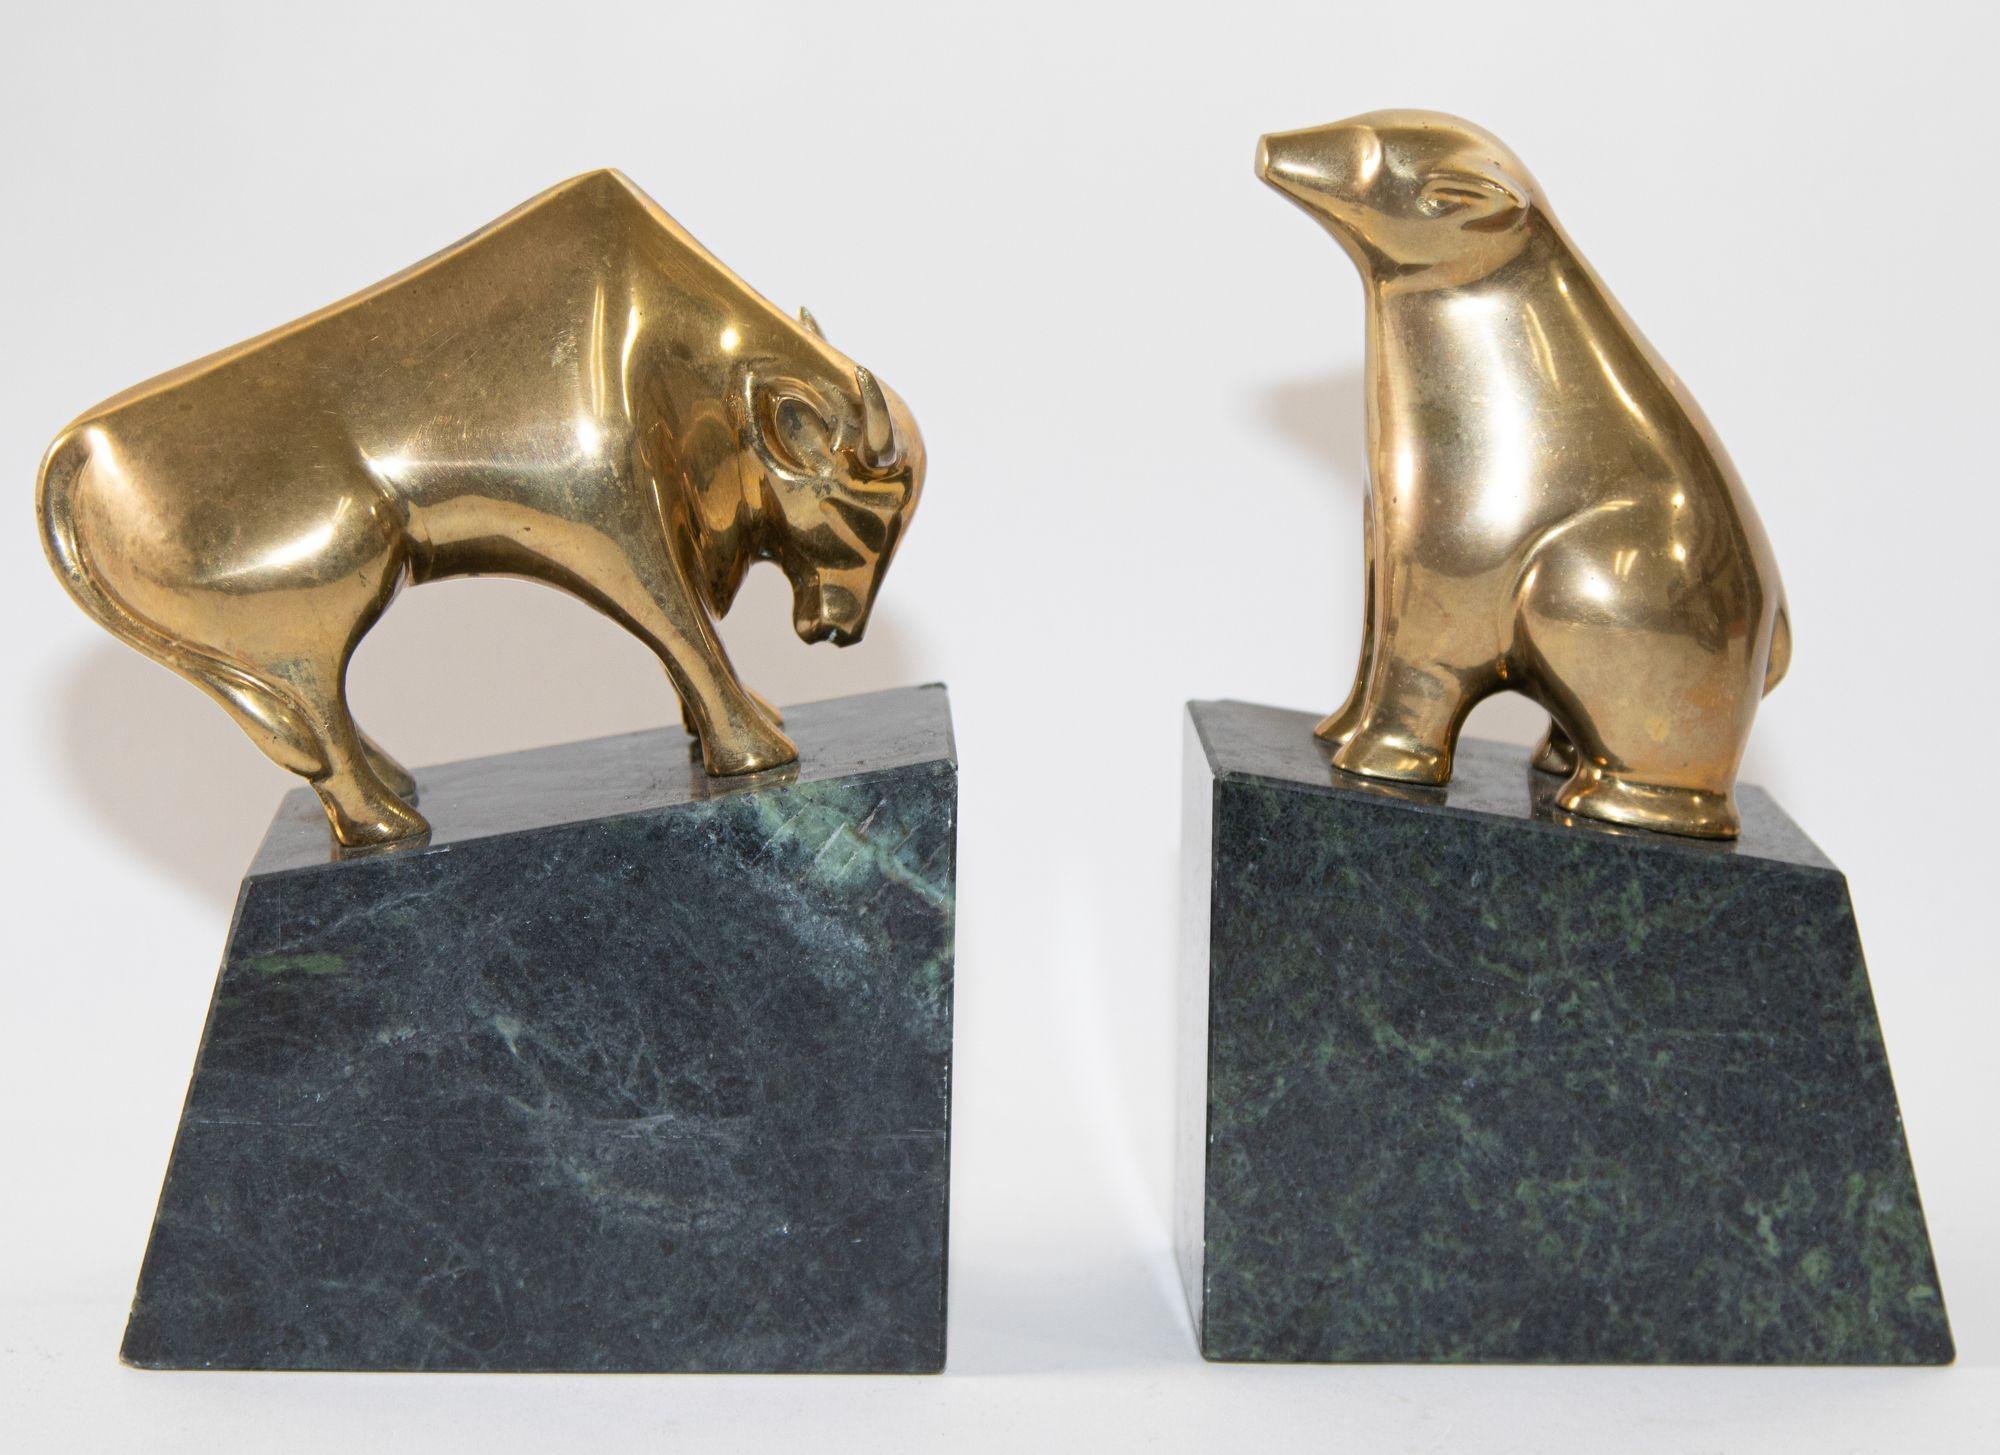 American Art Deco Polished Brass Bull and Bear Bookends Paperweights 1950s.
Polished Brass Bull and Bear Bookends Paperweights.
Vintage American Art Deco style brass bull and bear bookends, paperweights.
These stunning vintage Wall Street bull and